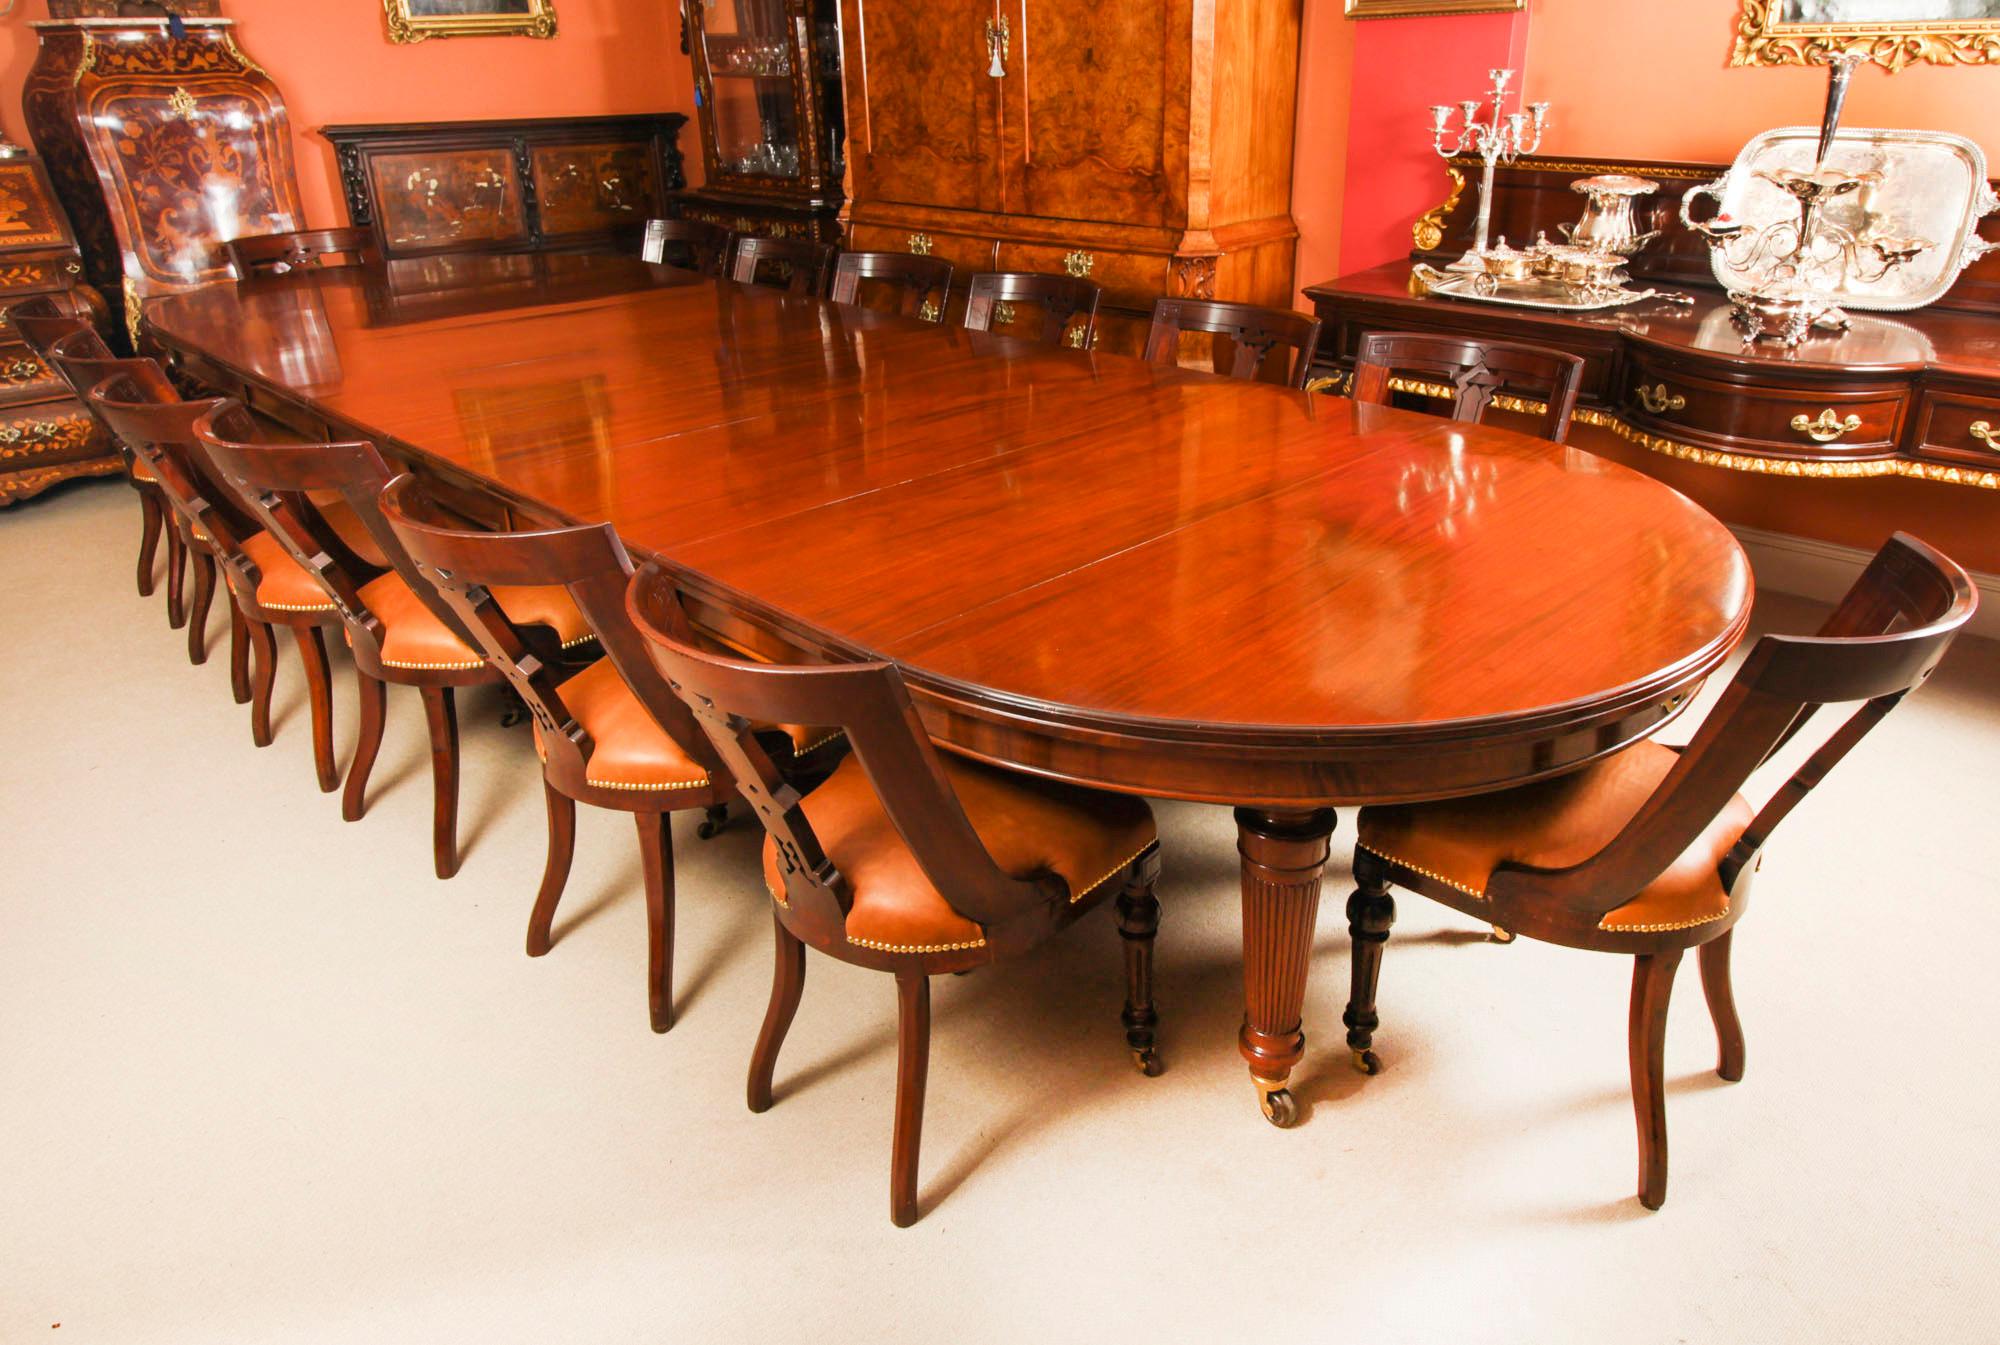 This is a beautiful antique late Victorian mahogany extending dining table by the renowned Victorian cabinet makers, Edwards and Roberts, and circa 1880 in date.

This amazing table can seat sixteen people in comfort and has been hand-crafted from